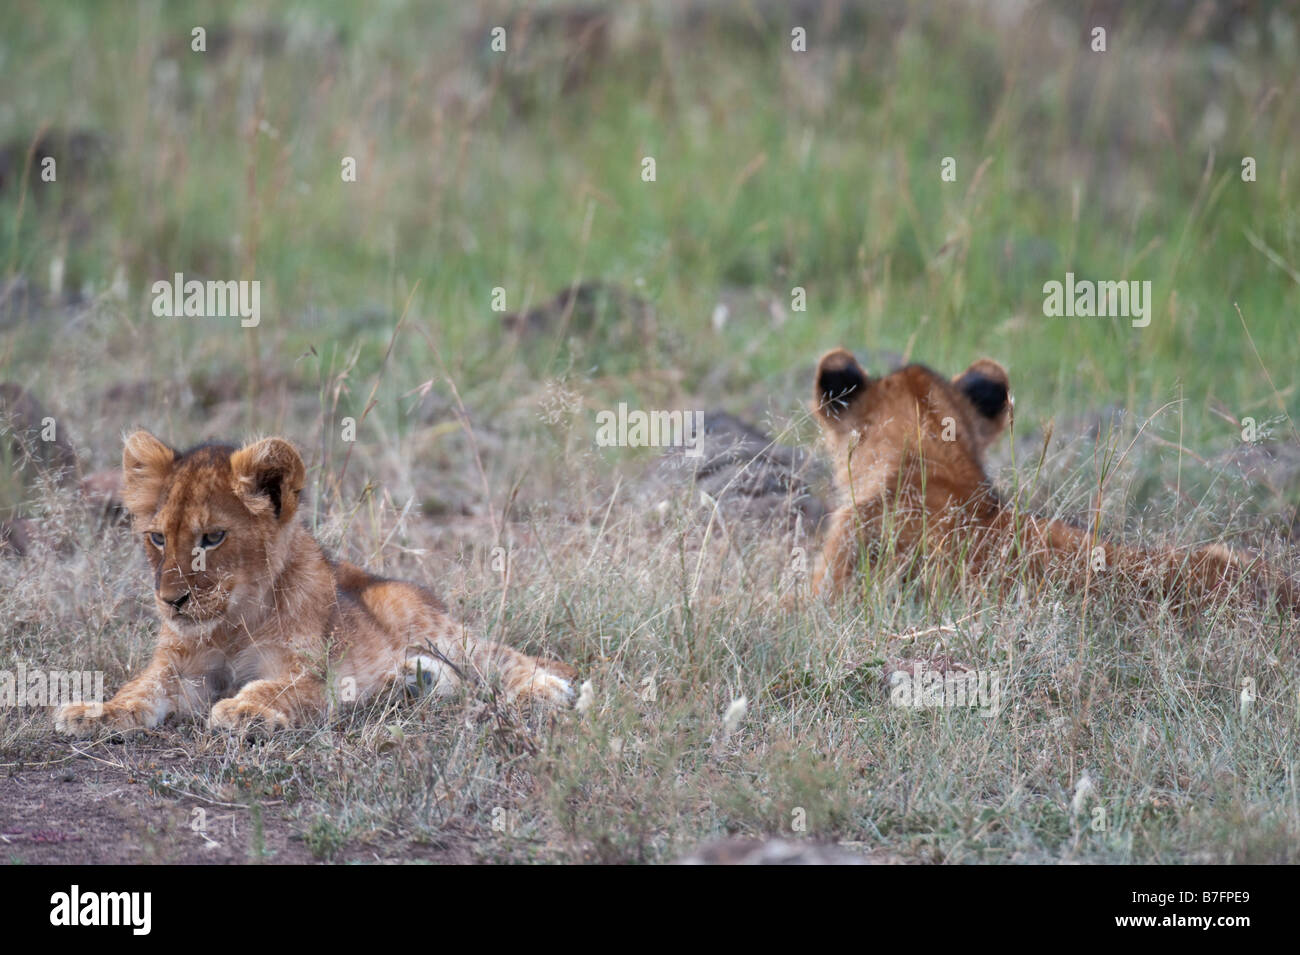 Pair of lion cubs looking in opposite directions Stock Photo